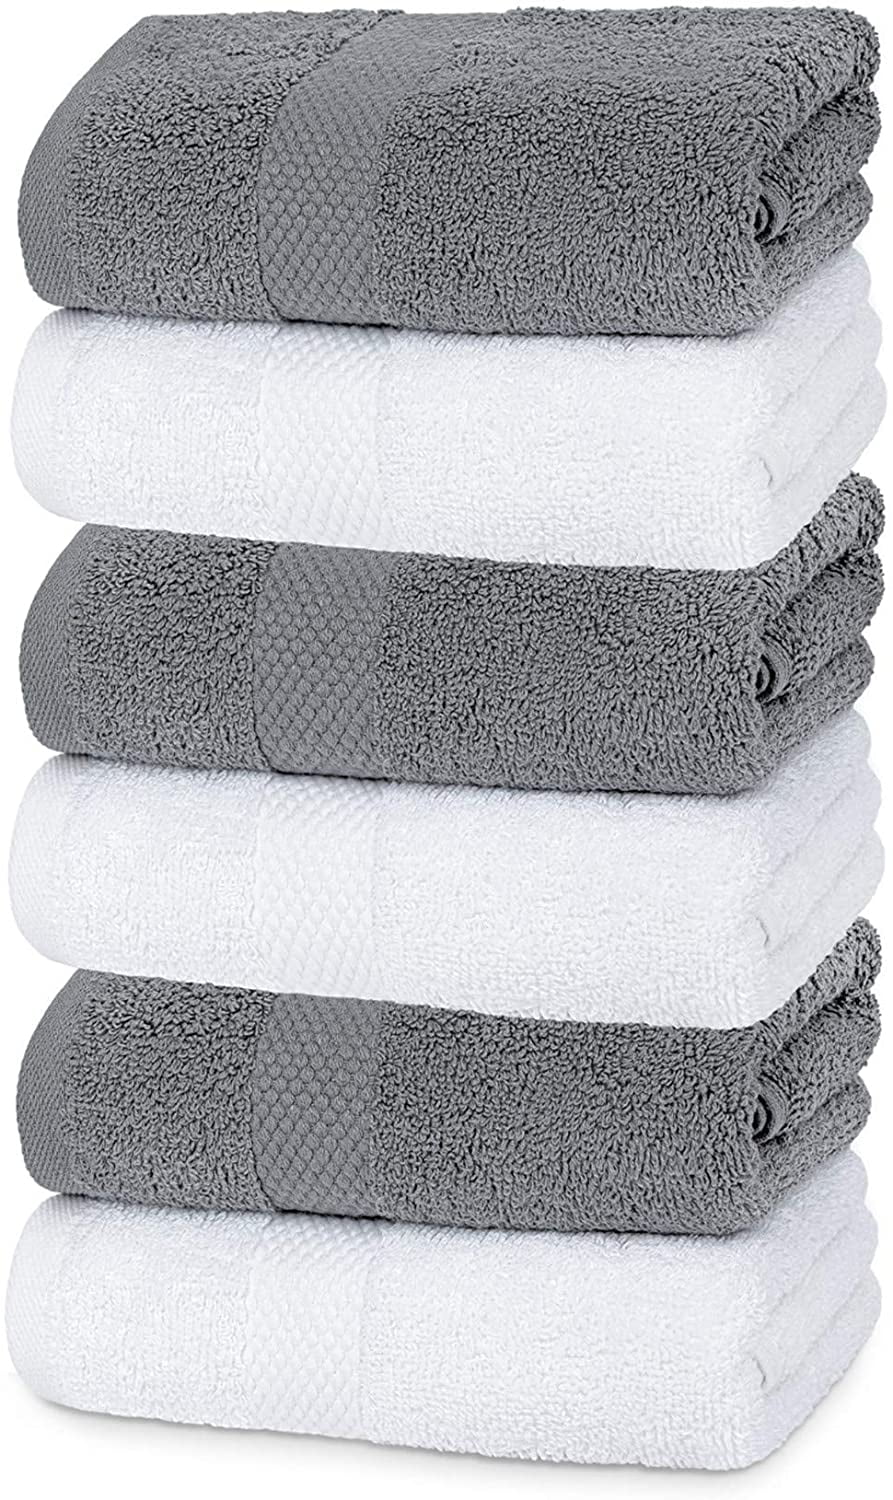 Luxury Grey/White Hand Towels Soft Cotton Absorbent Hotel towel 6-Pack 